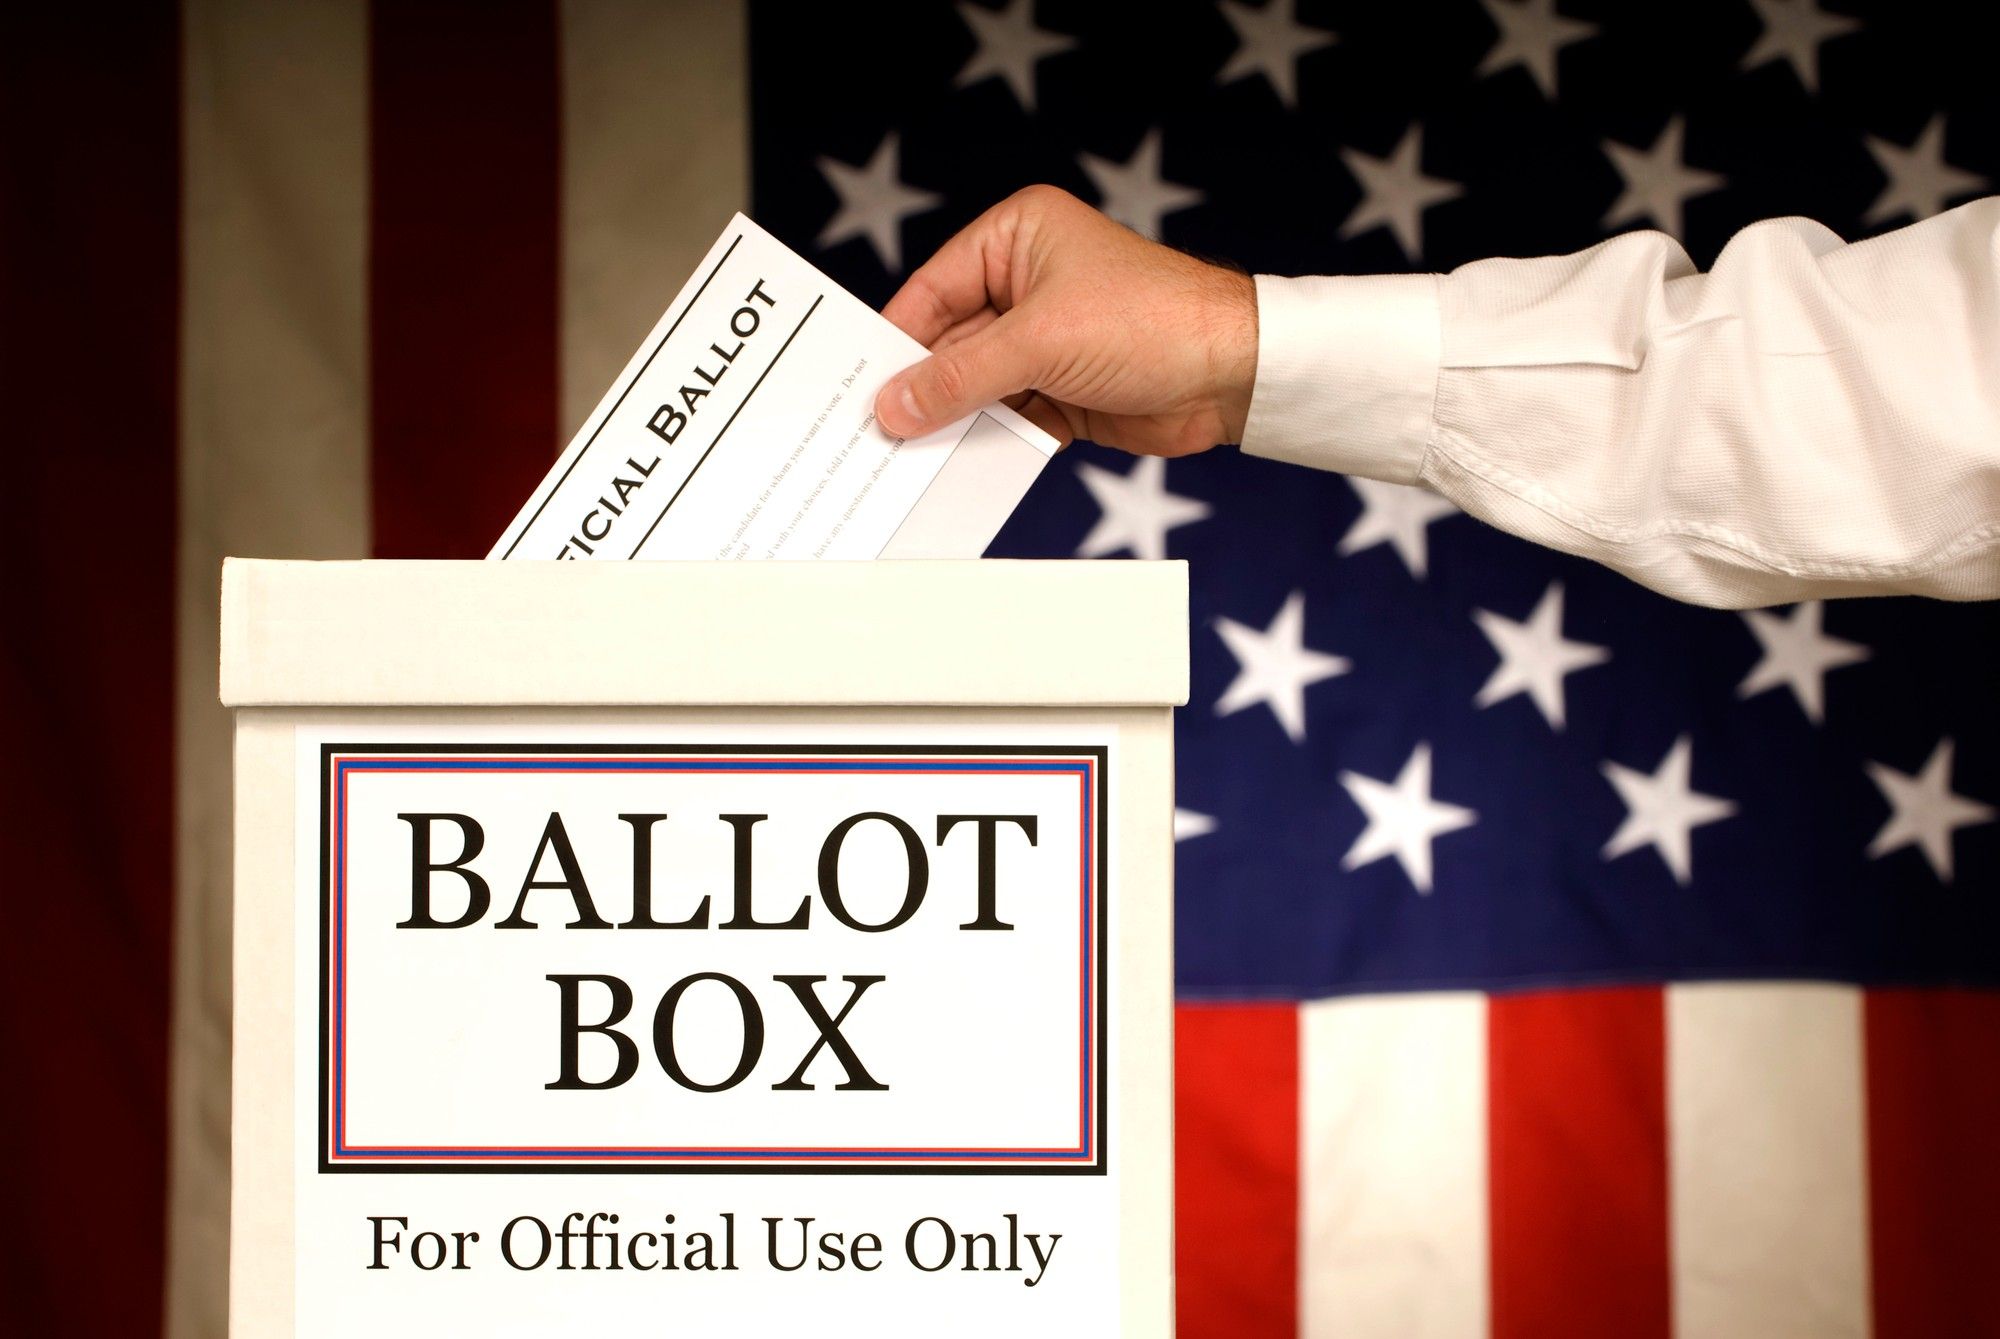 Texas voters challenge ballot-box restrictions.